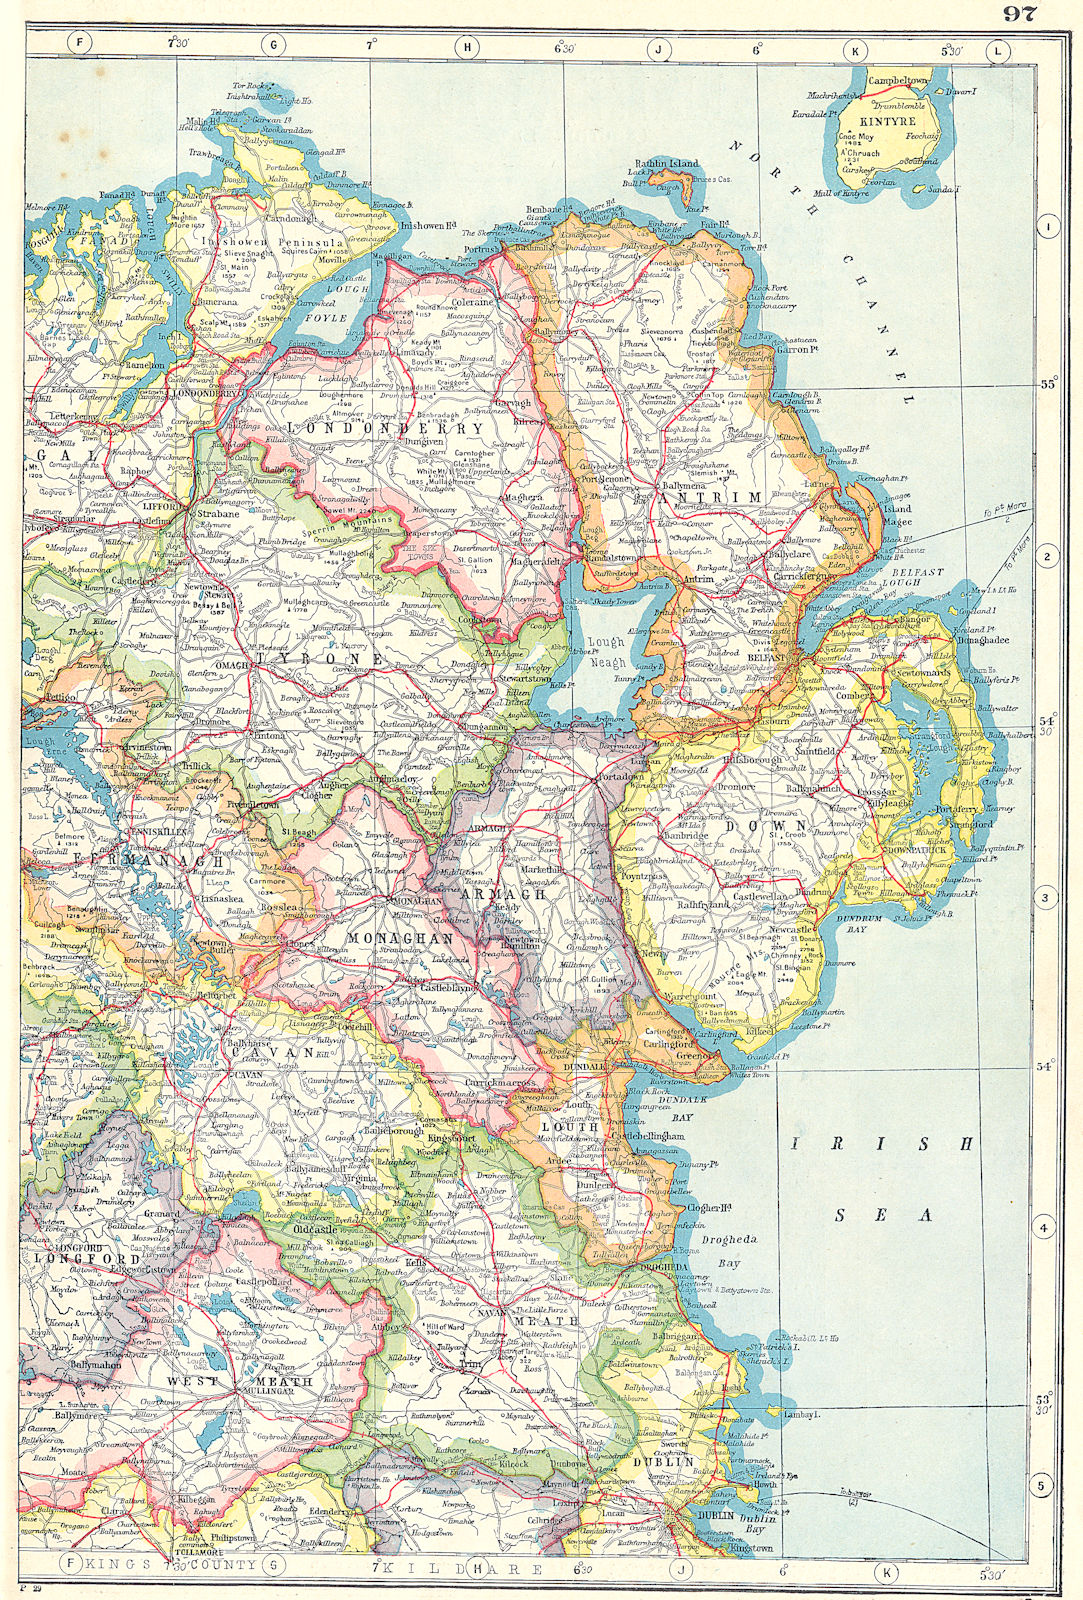 Associate Product IRELAND NORTH EAST. Ulster Antrim Down Londonderry Tyrone Armagh etc 1920 map